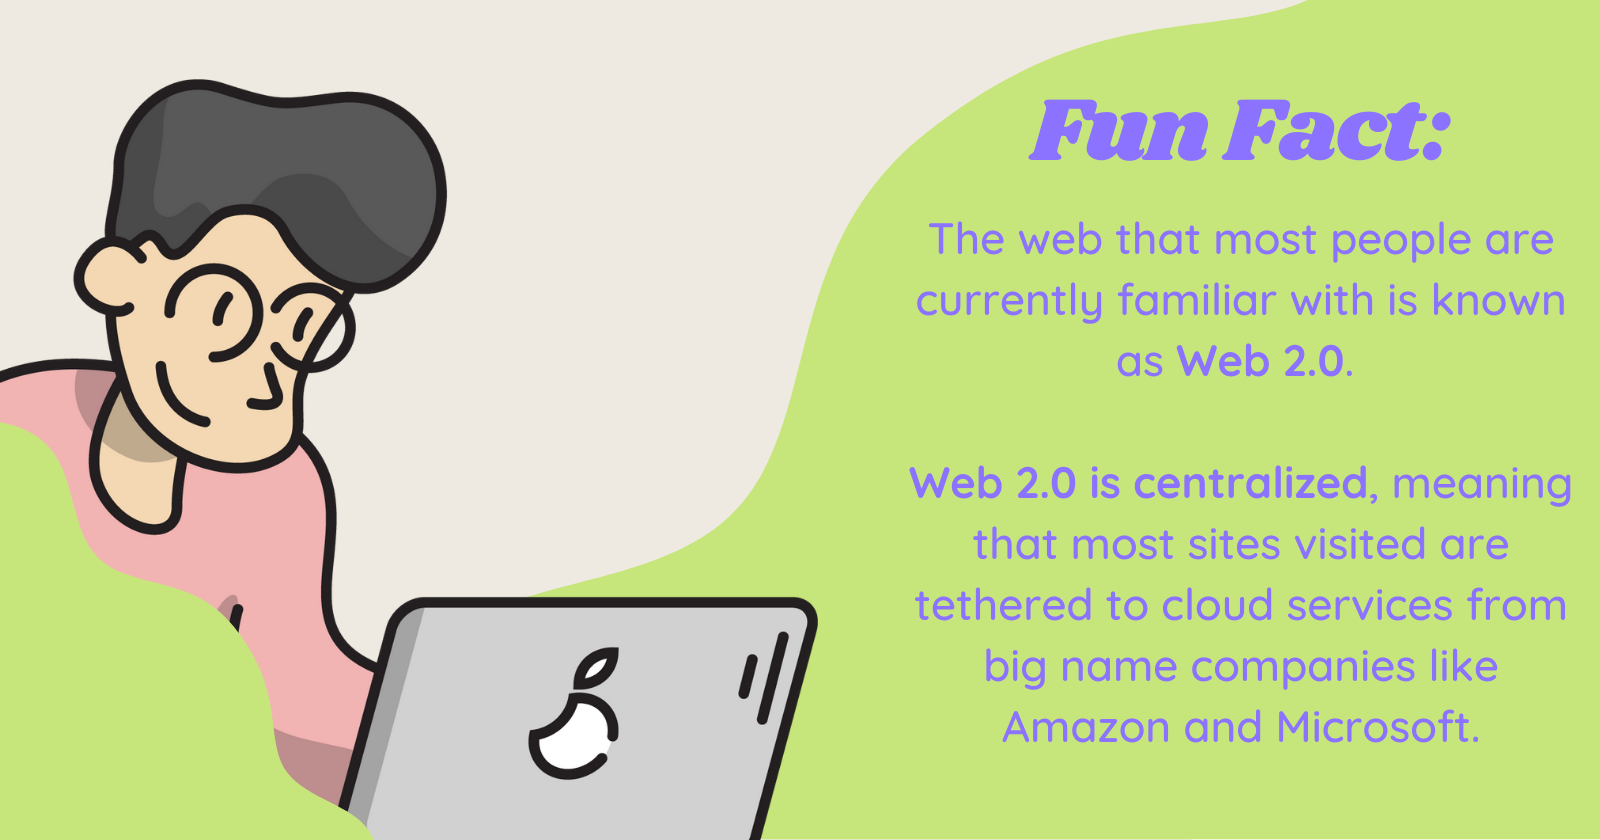 Fun fact: The web that most people are currently familiar with is known as Web 2.0. Web 2.0 is centralized, meaning that most sites visited are tethered to cloud services from big name companies like Amazon and Microsoft.